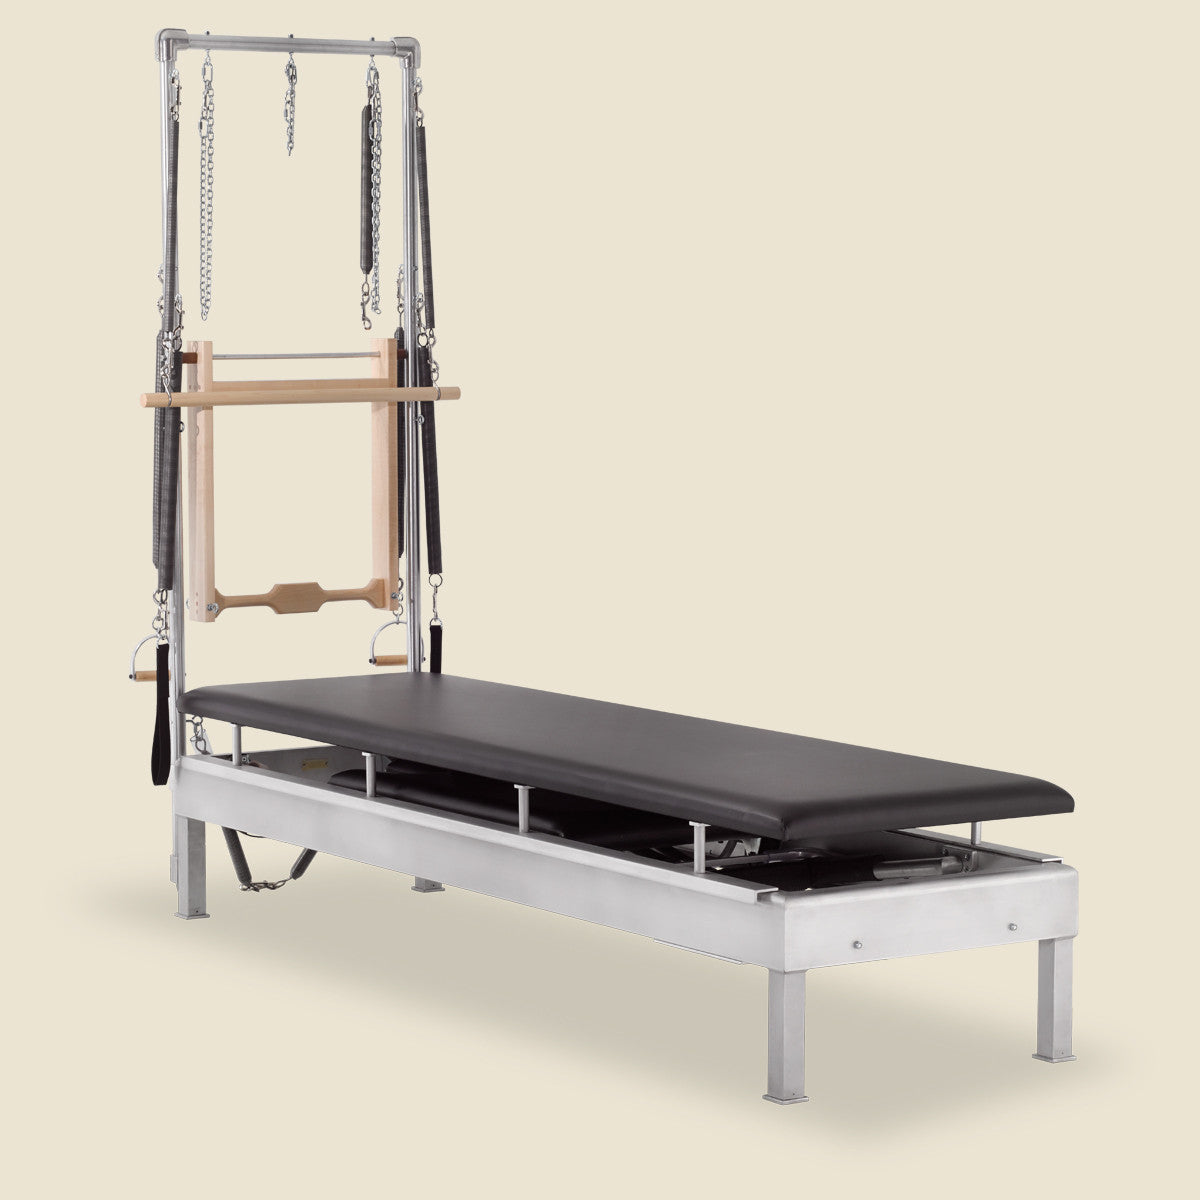 Tower Machine Full Trapeze Elevated Bed Half High Trapeze Pilates